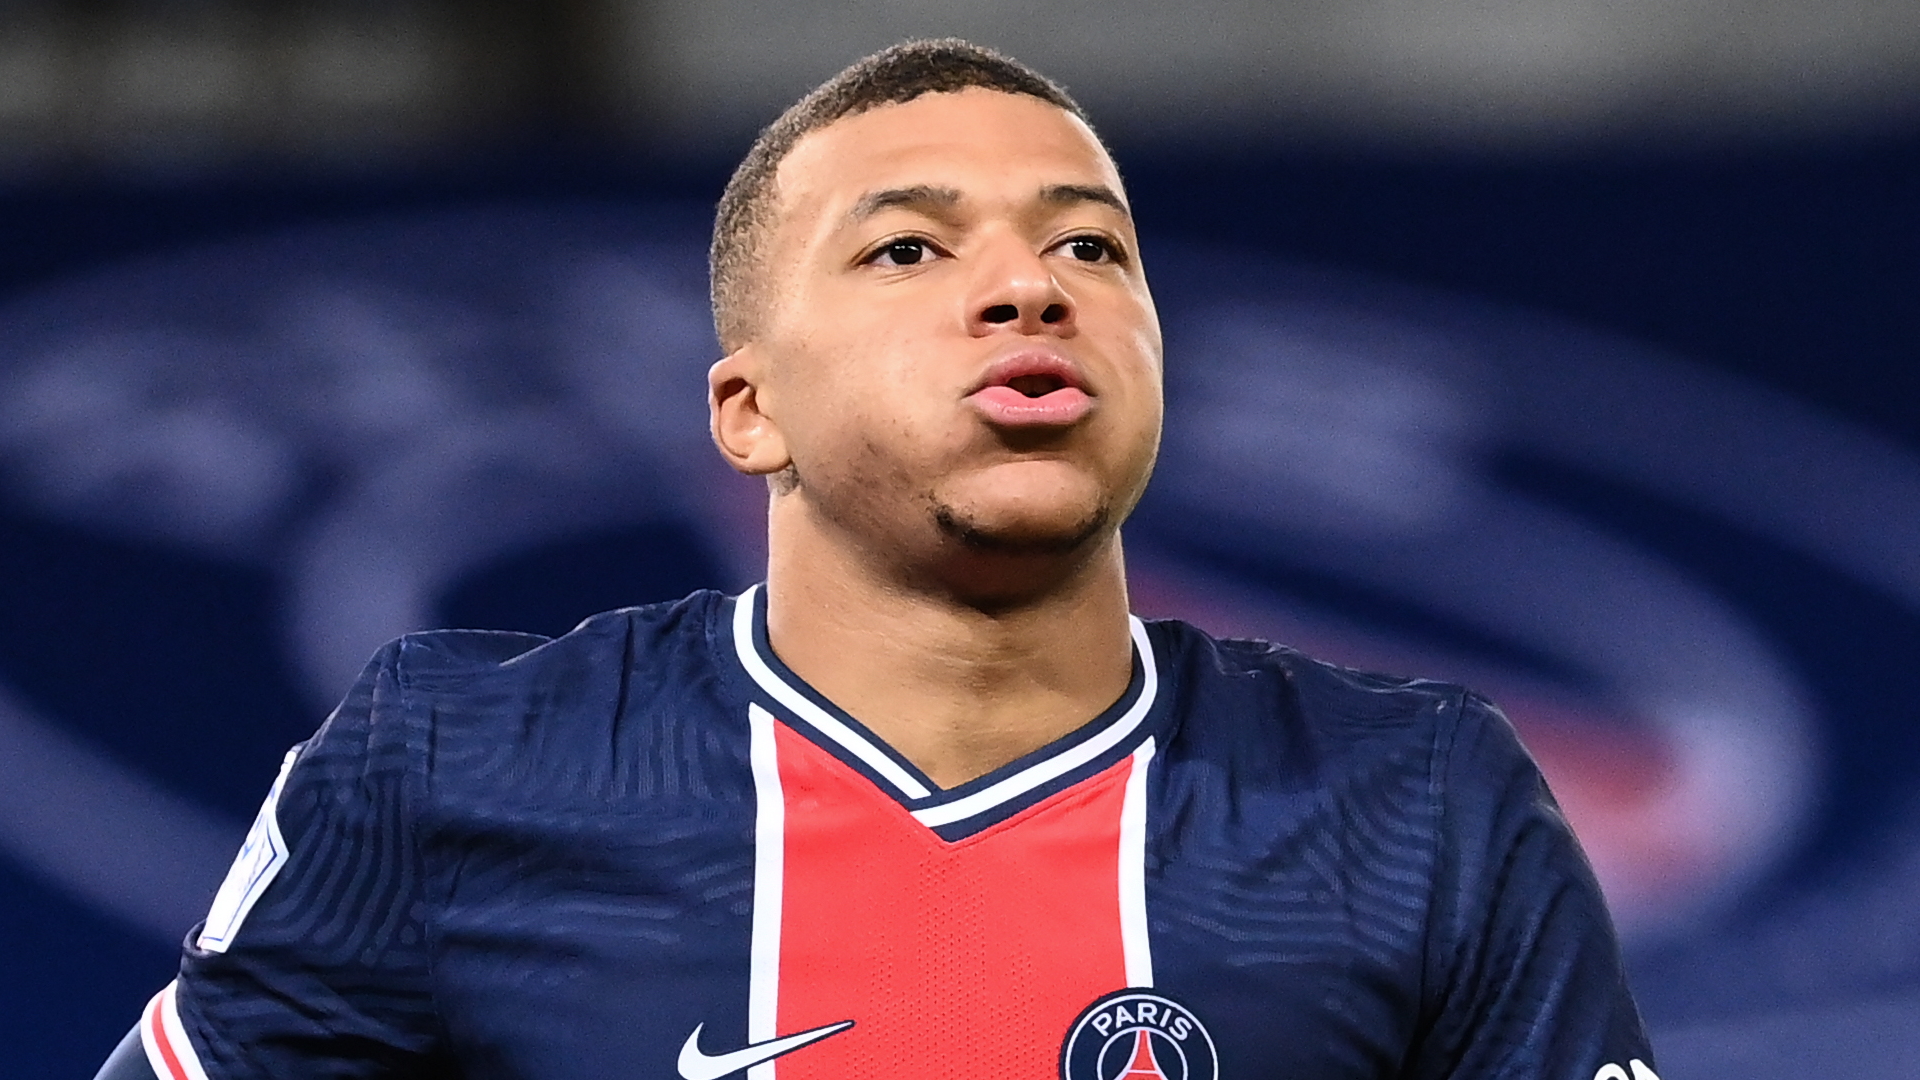 'We are with you Webo' – Mbappe, Adepoju and Milla lead solidarity for Basaksehir coach after alleged racist abuse